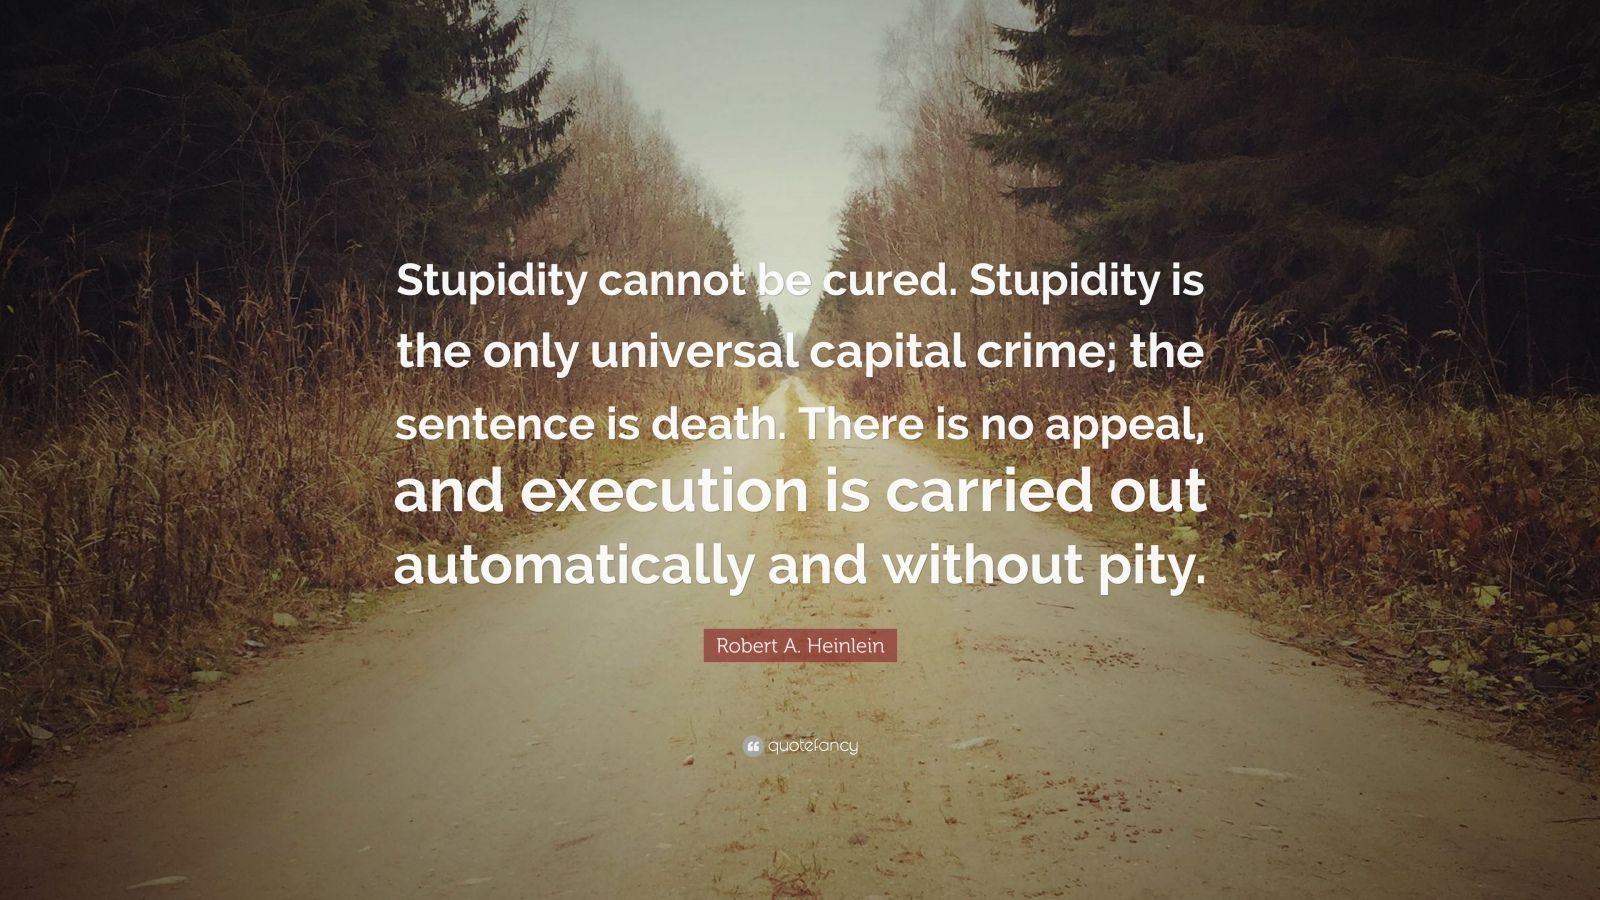 Robert A. Heinlein Quote: “Stupidity cannot be cured. Stupidity is the